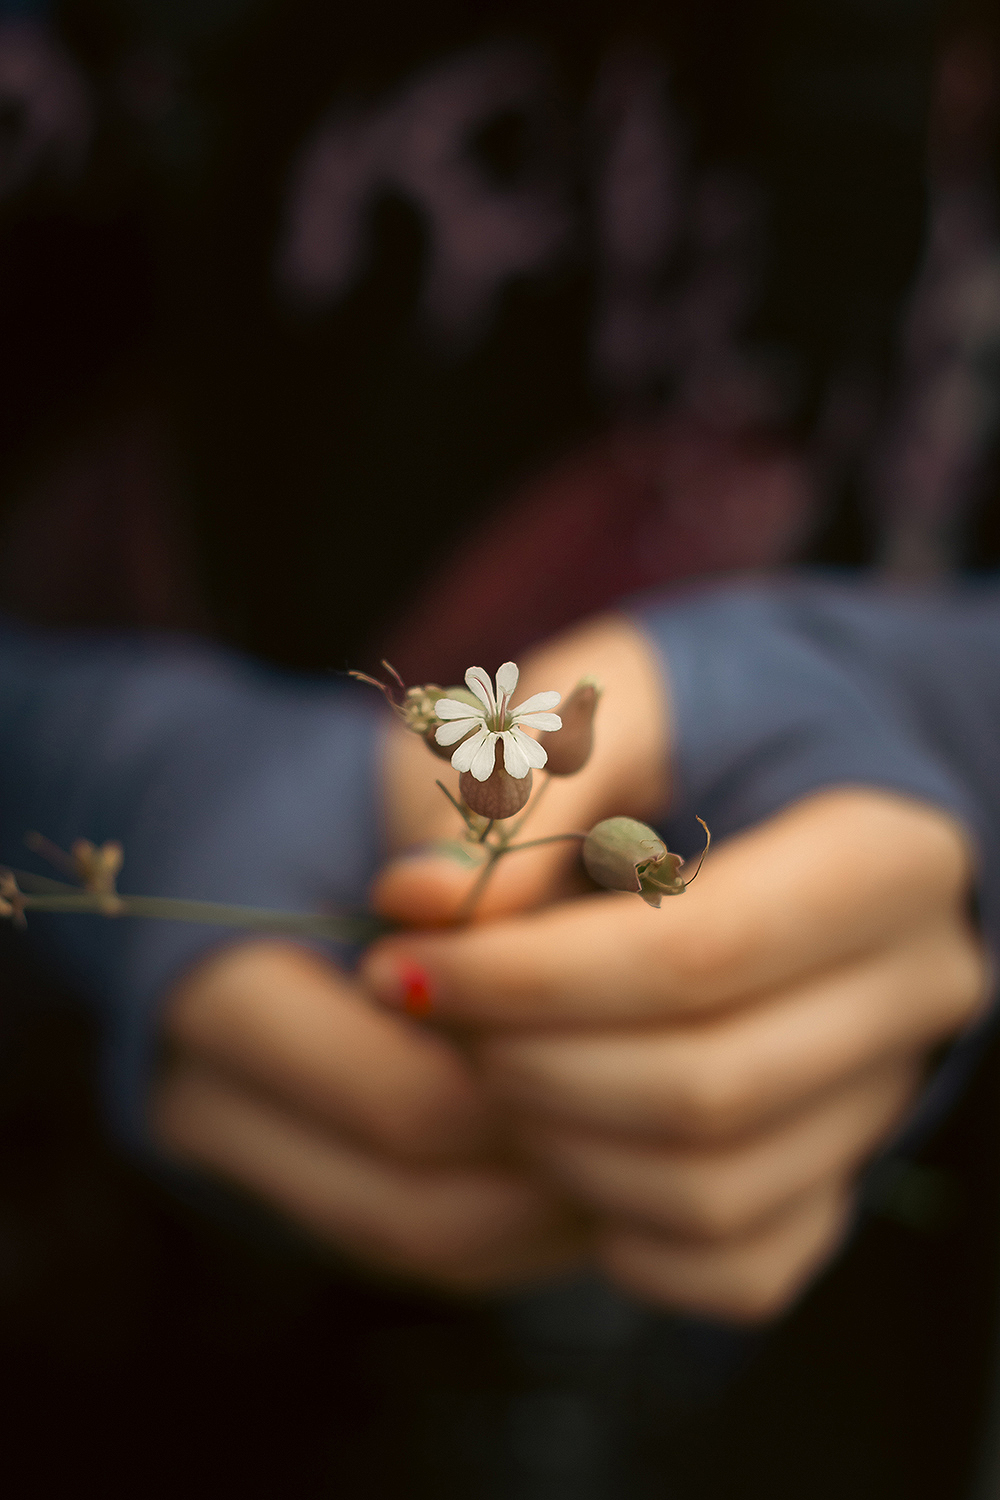 Holding flowers in hand, closeup